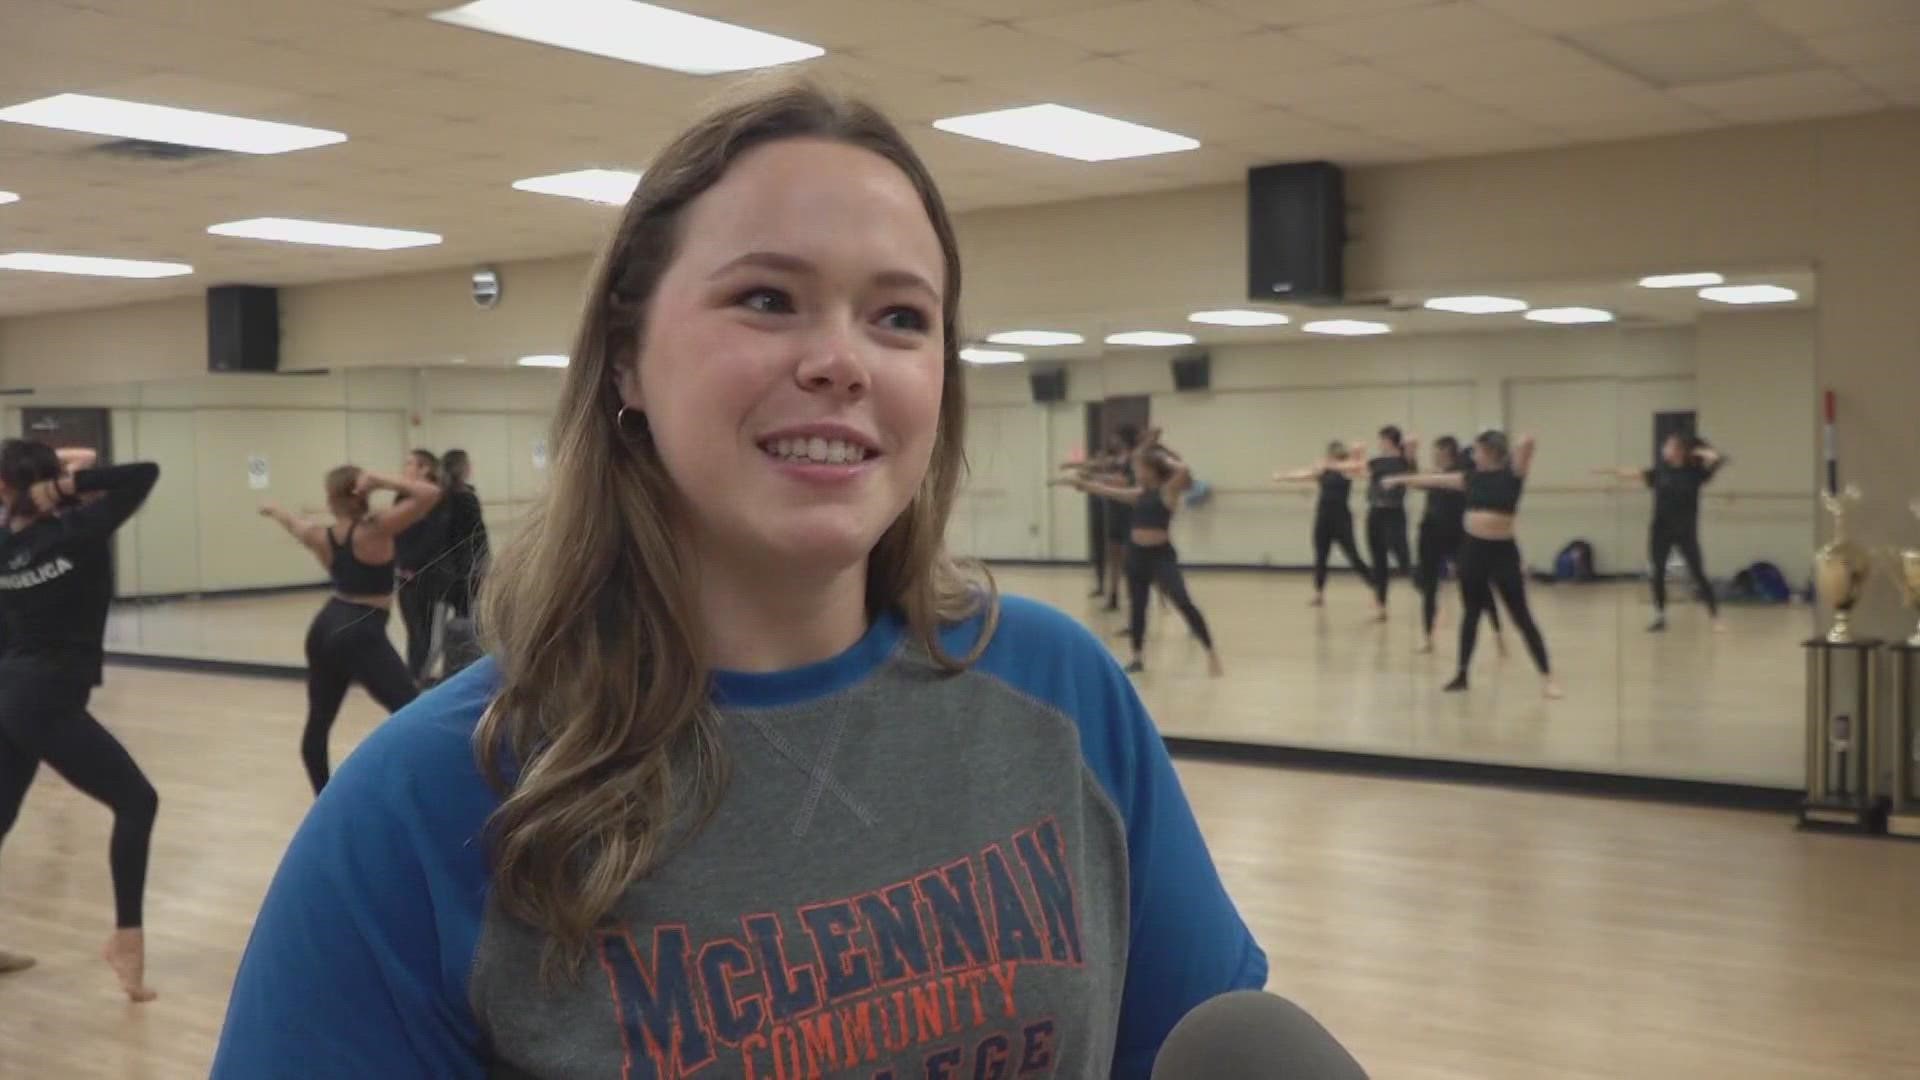 The McLennan Community College dance team will strut their stuff at the Thanksgiving Day Parade this Thursday airing on NBC